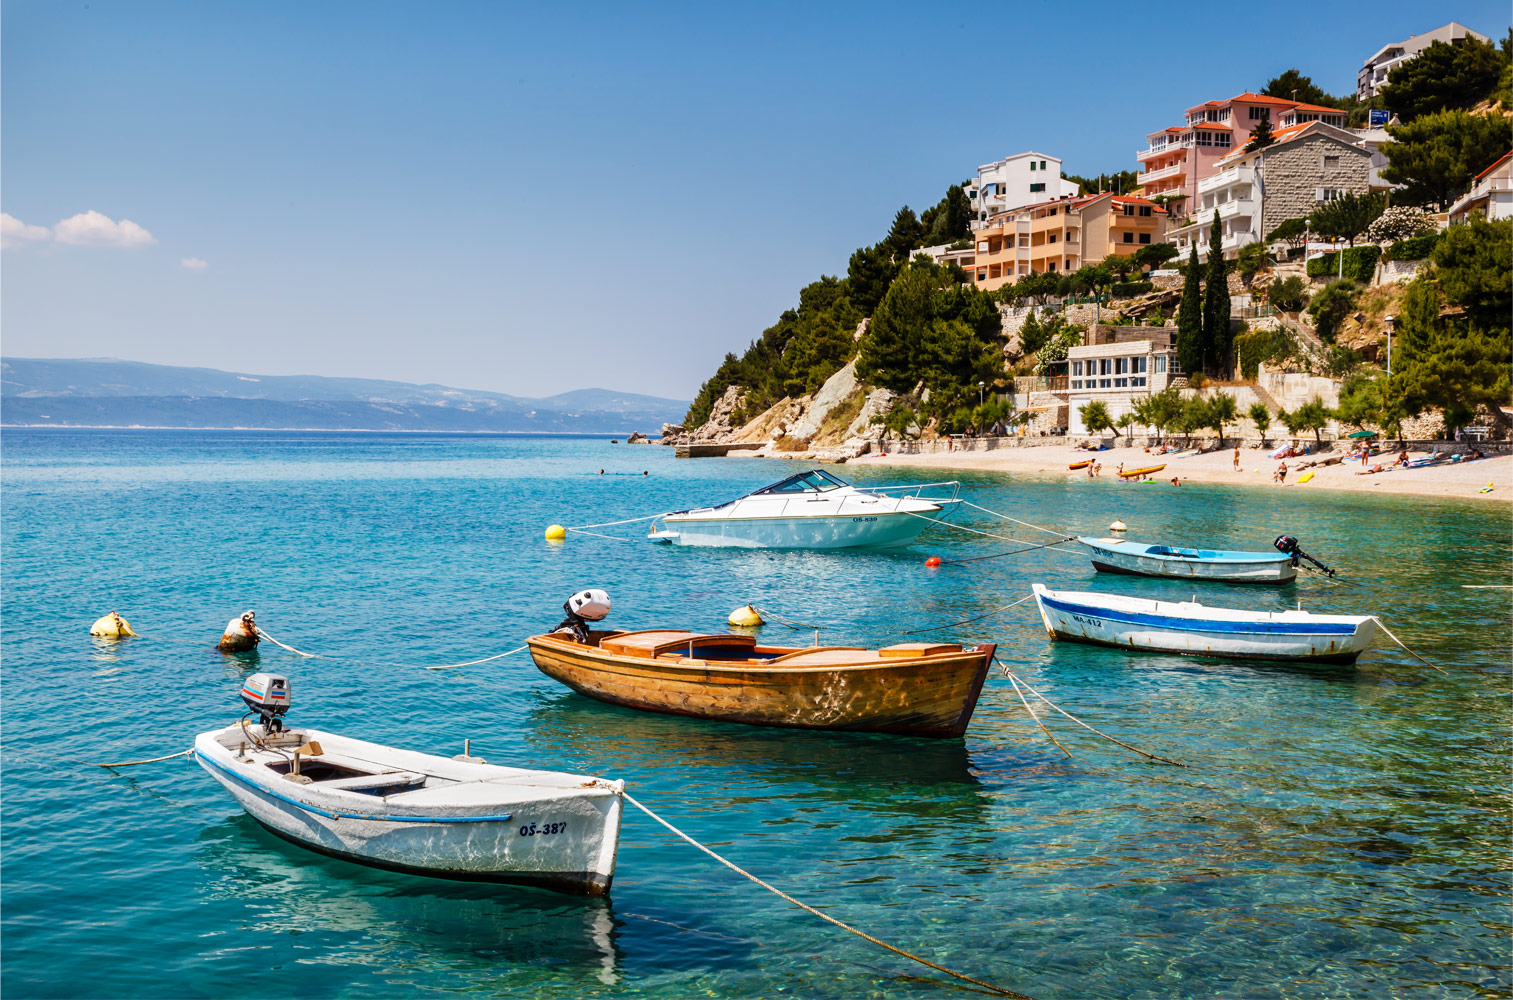 Why a trip to the Mediterranean can’t be beat